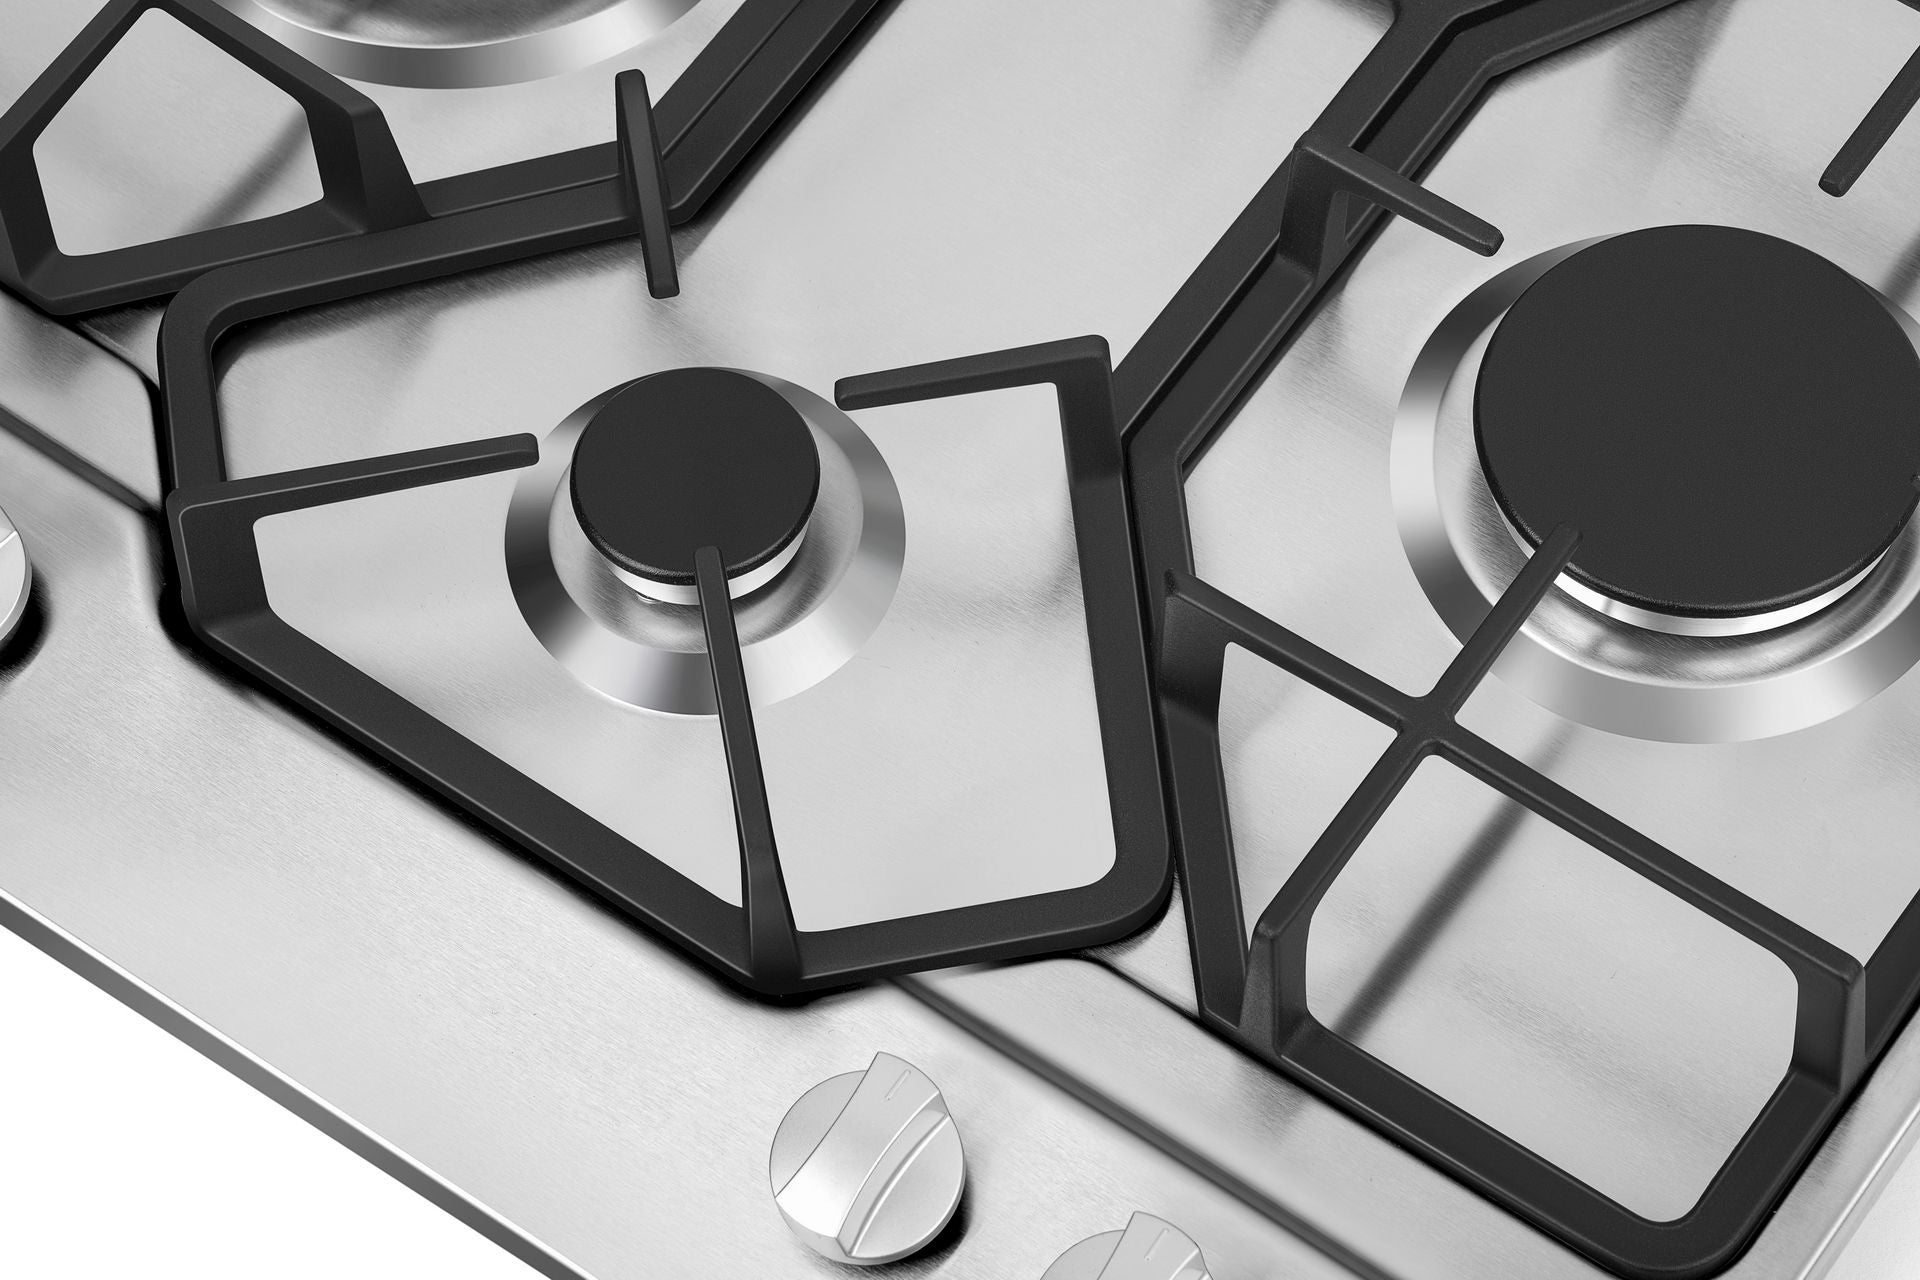 Empava 24 in. 4 burner Built-in Gas Cooktop in Stainless Steel (24GC4B67A)